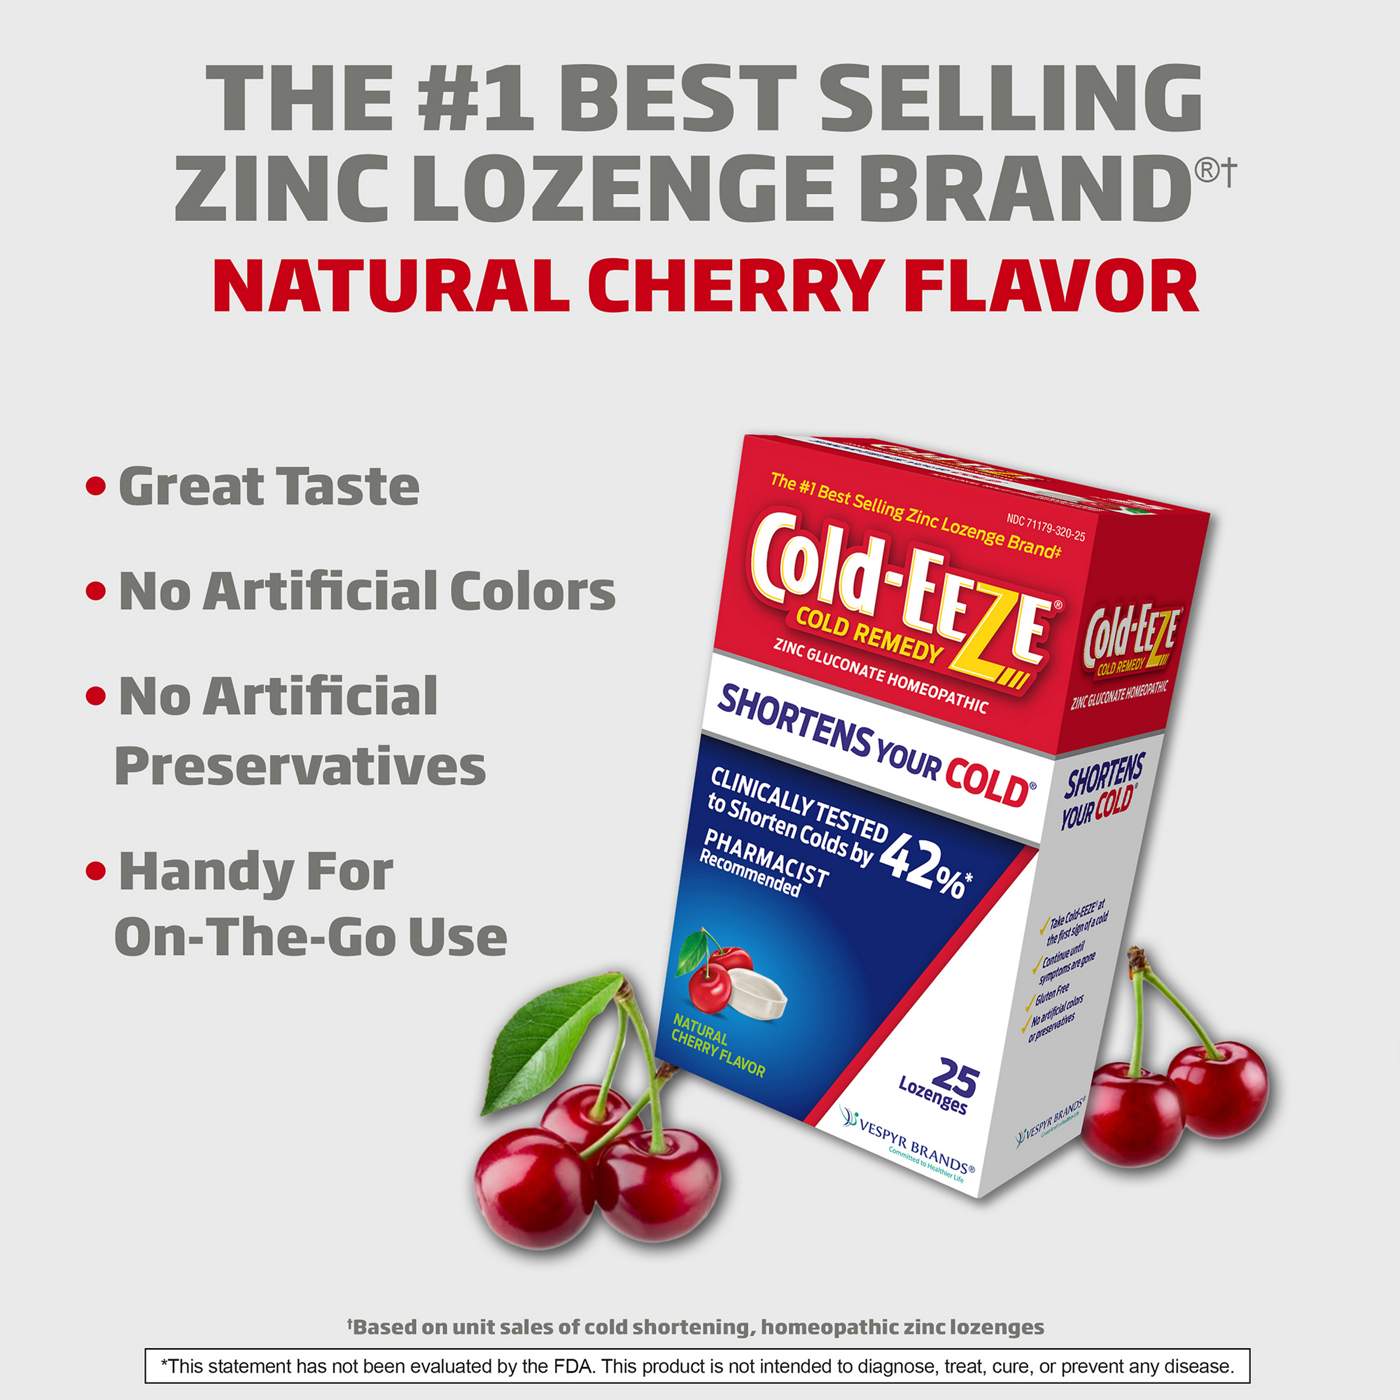 Cold-EEZE Cold Remedy Zinc Lozenges - Natural Cherry; image 2 of 7